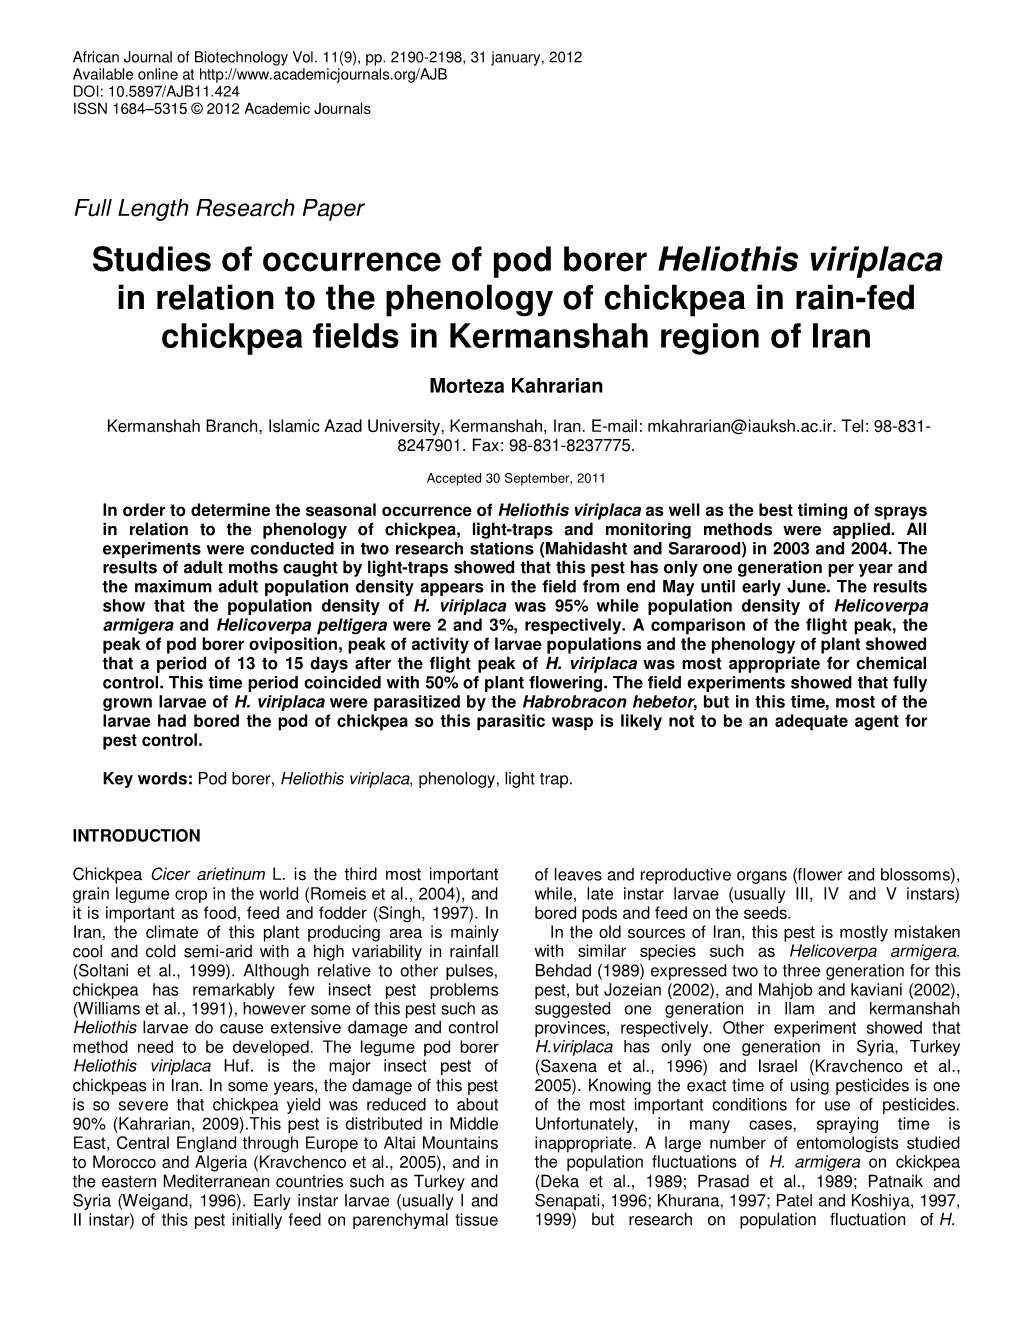 Studies of Occurrence of Pod Borer Heliothis Viriplaca in Relation to the Phenology of Chickpea in Rain-Fed Chickpea Fields in Kermanshah Region of Iran